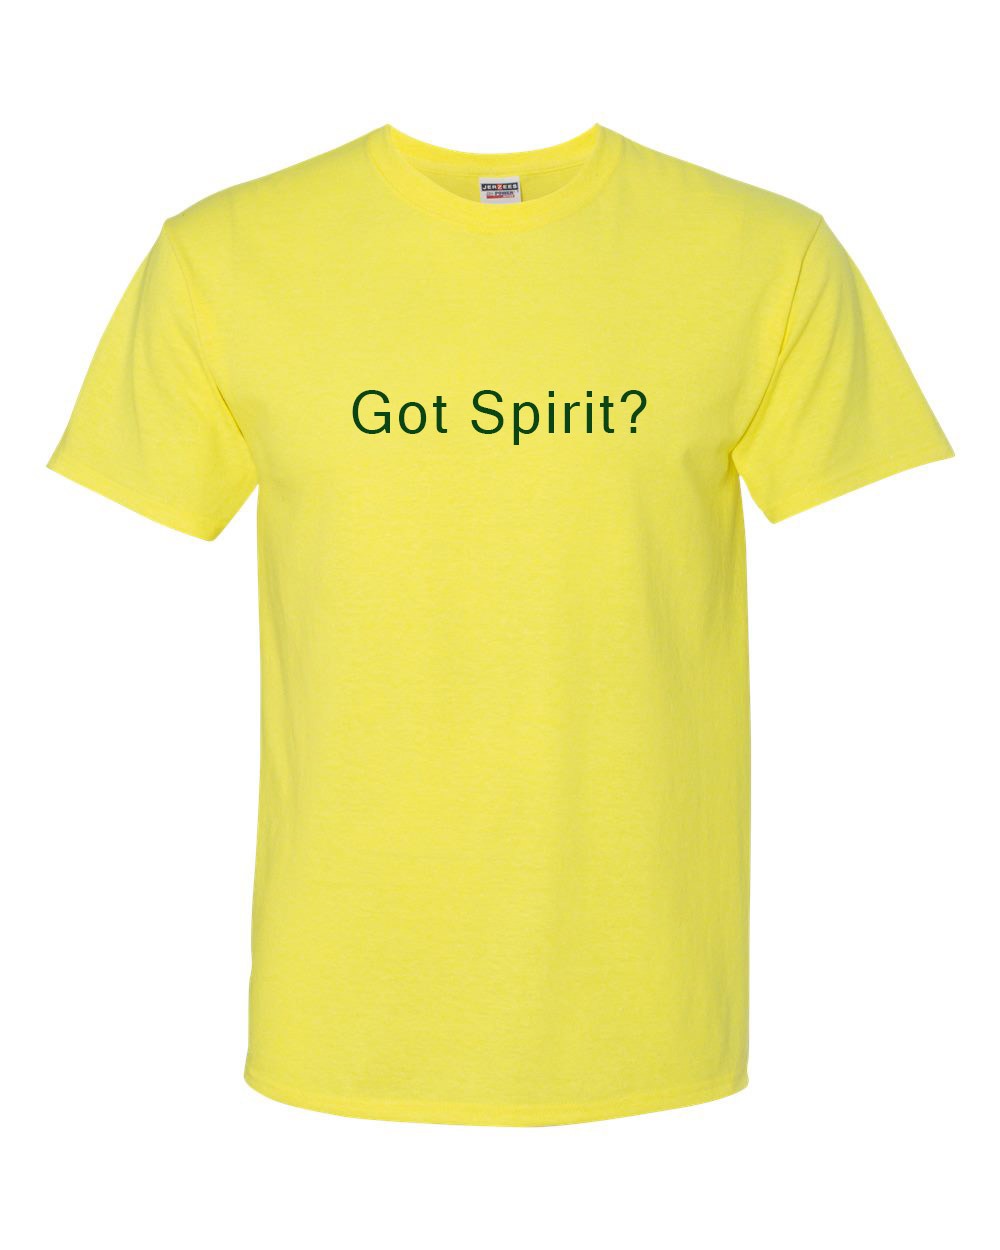 Transfiguration Got Spirit S/S Spirit T-Shirt w/ Logo - Please Allow 2-3 Weeks for Delivery